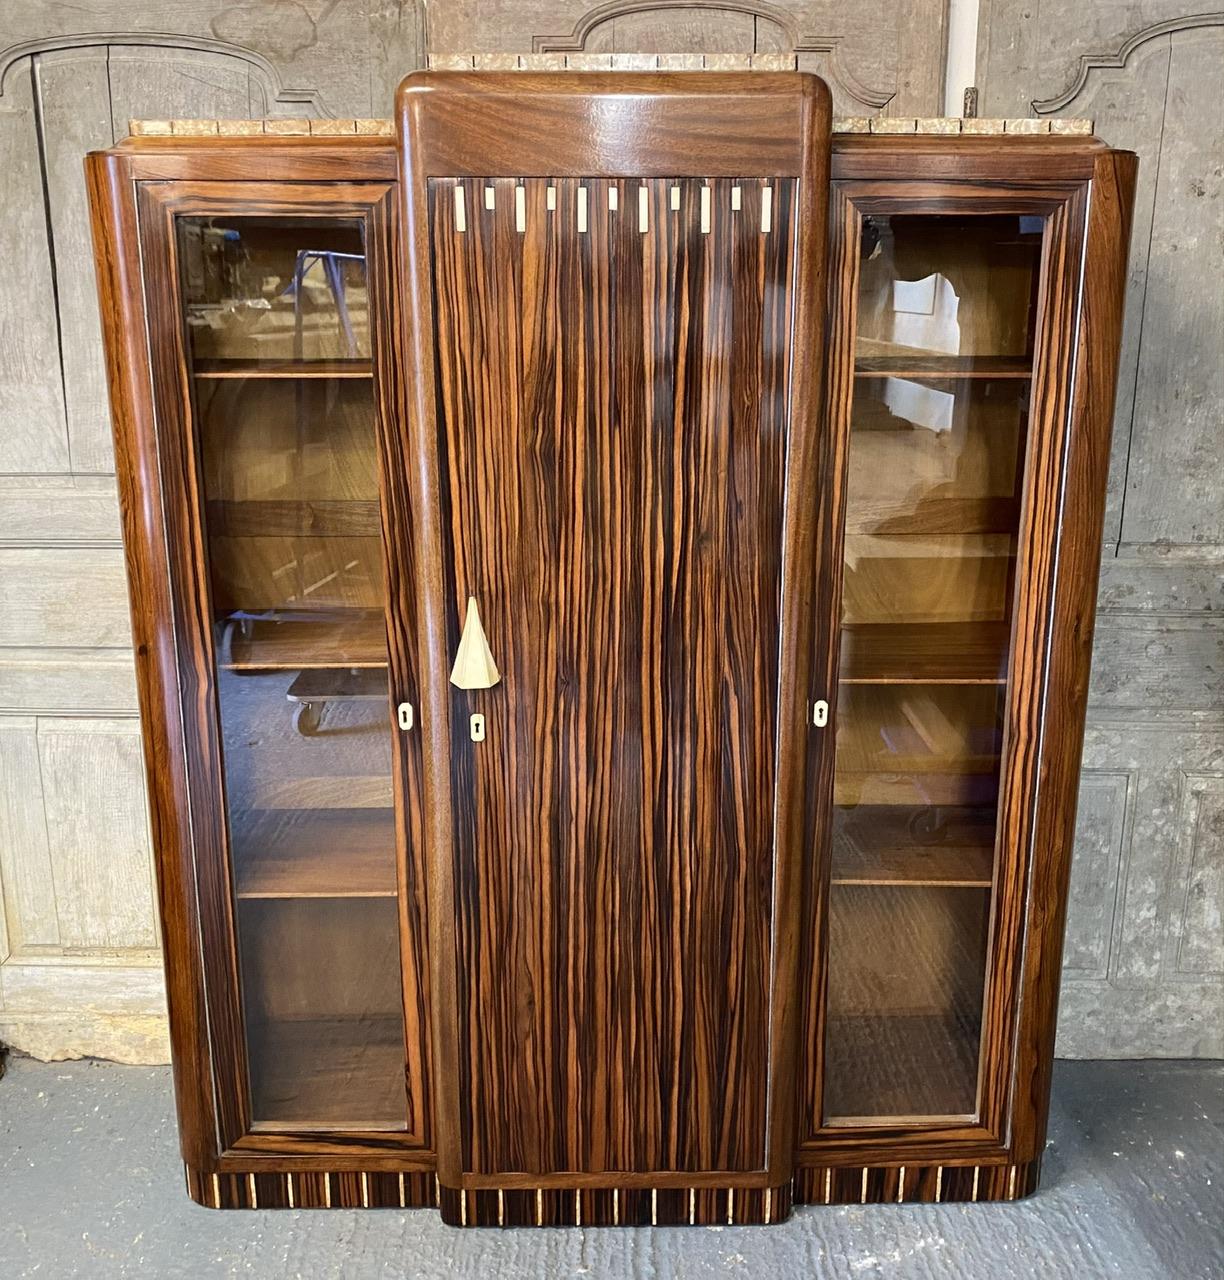 We are delighted to offer this stunning Art Deco Cabinet one of the best we have ever seen. It originates from France and we were lucky enough to find it in Paris. 
The design and quality are second to none and its made of Walnut, Macassar Ebony,